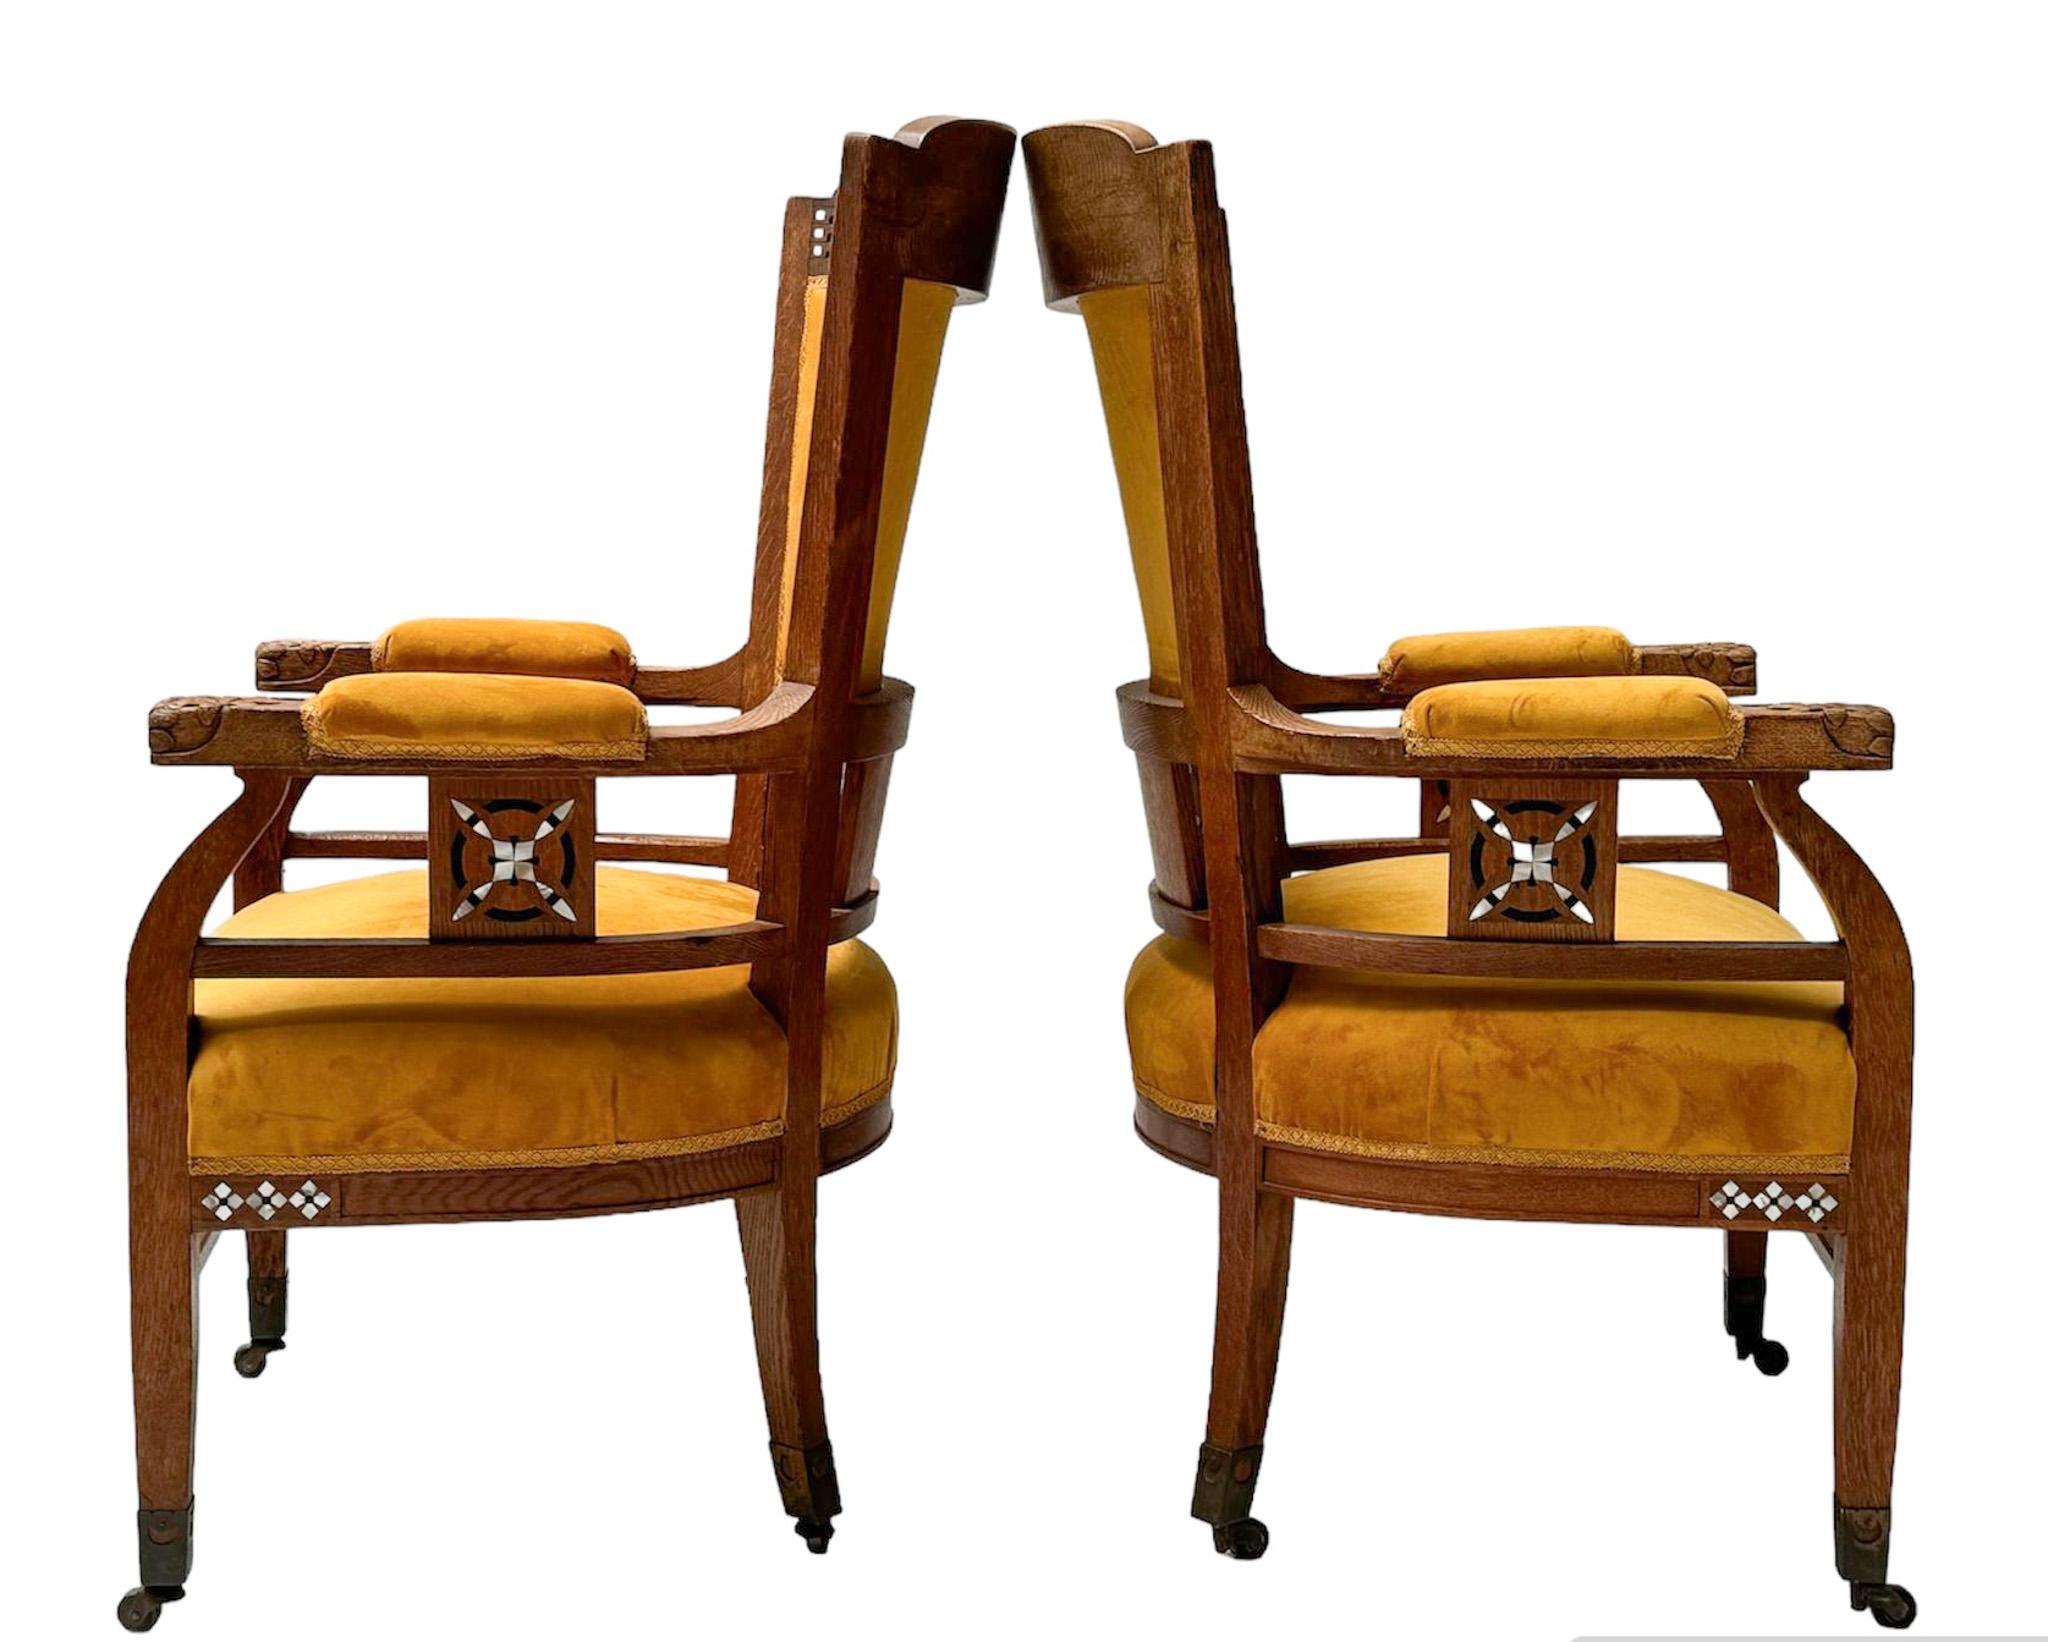 Early 20th Century Two Oak Art Nouveau Arts & Crafts Armchairs by H.F. Jansen & Zonen Amsterdam For Sale